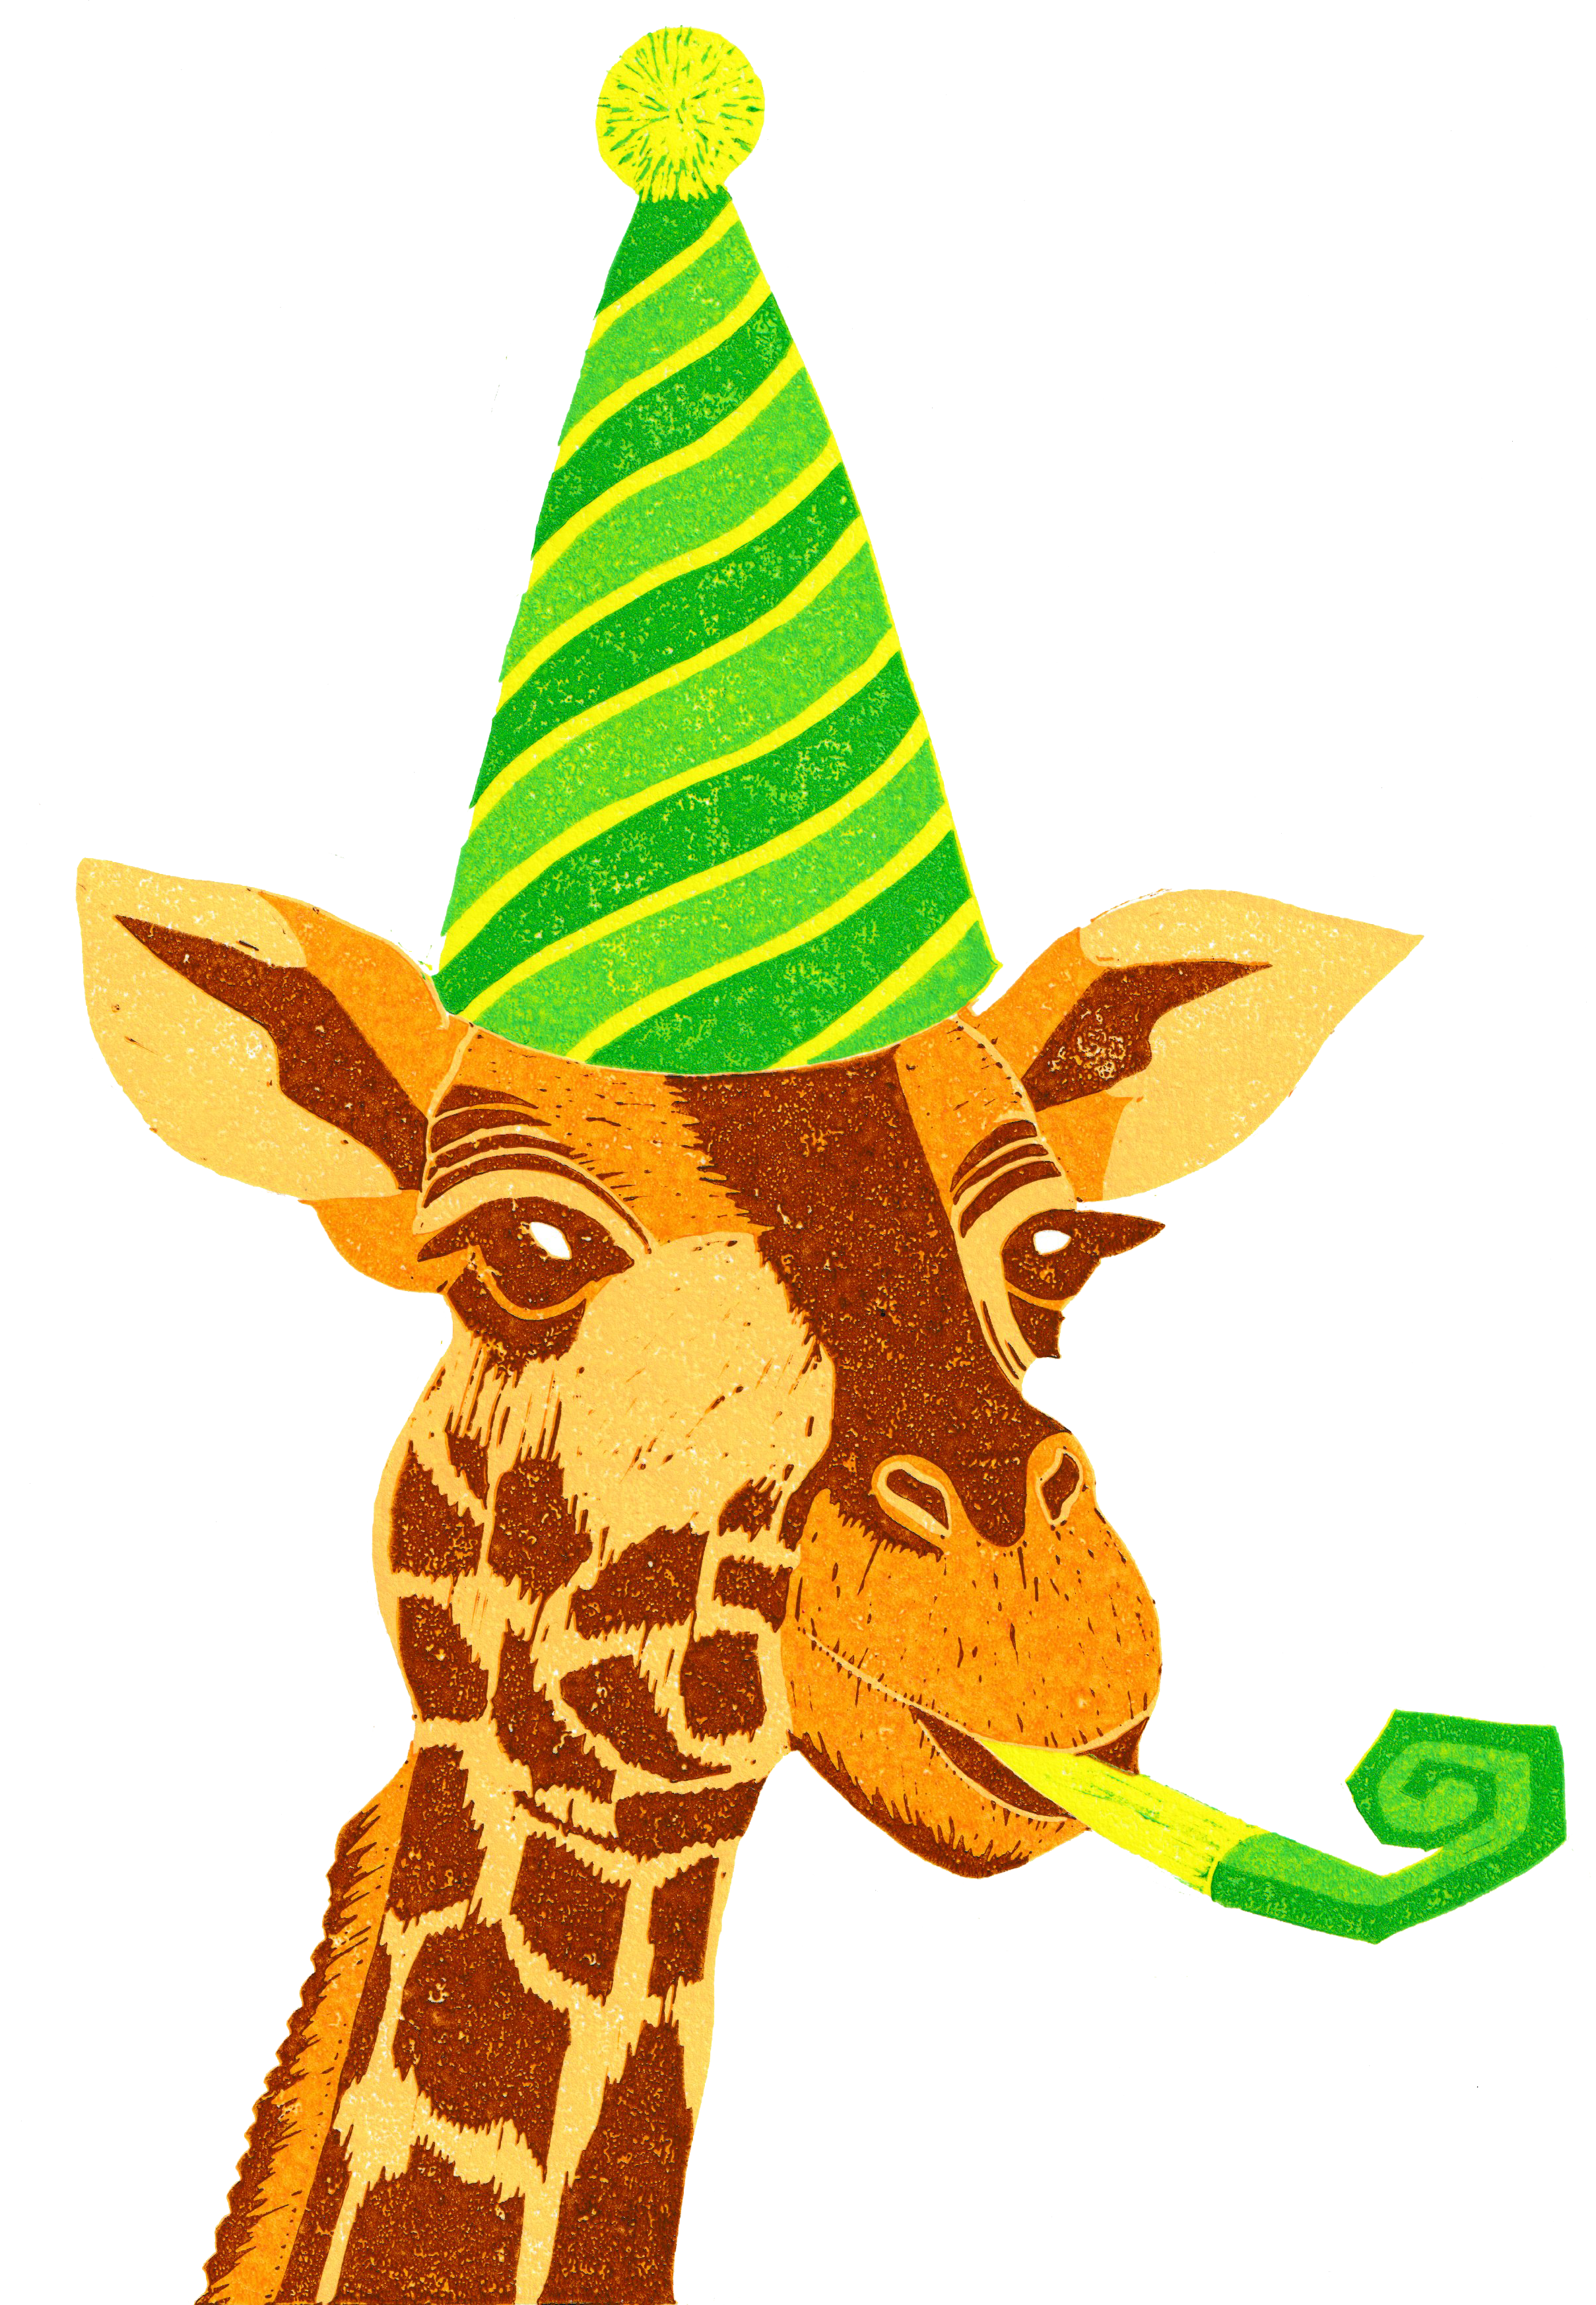 Giraffe with Party Hat transparent background.png